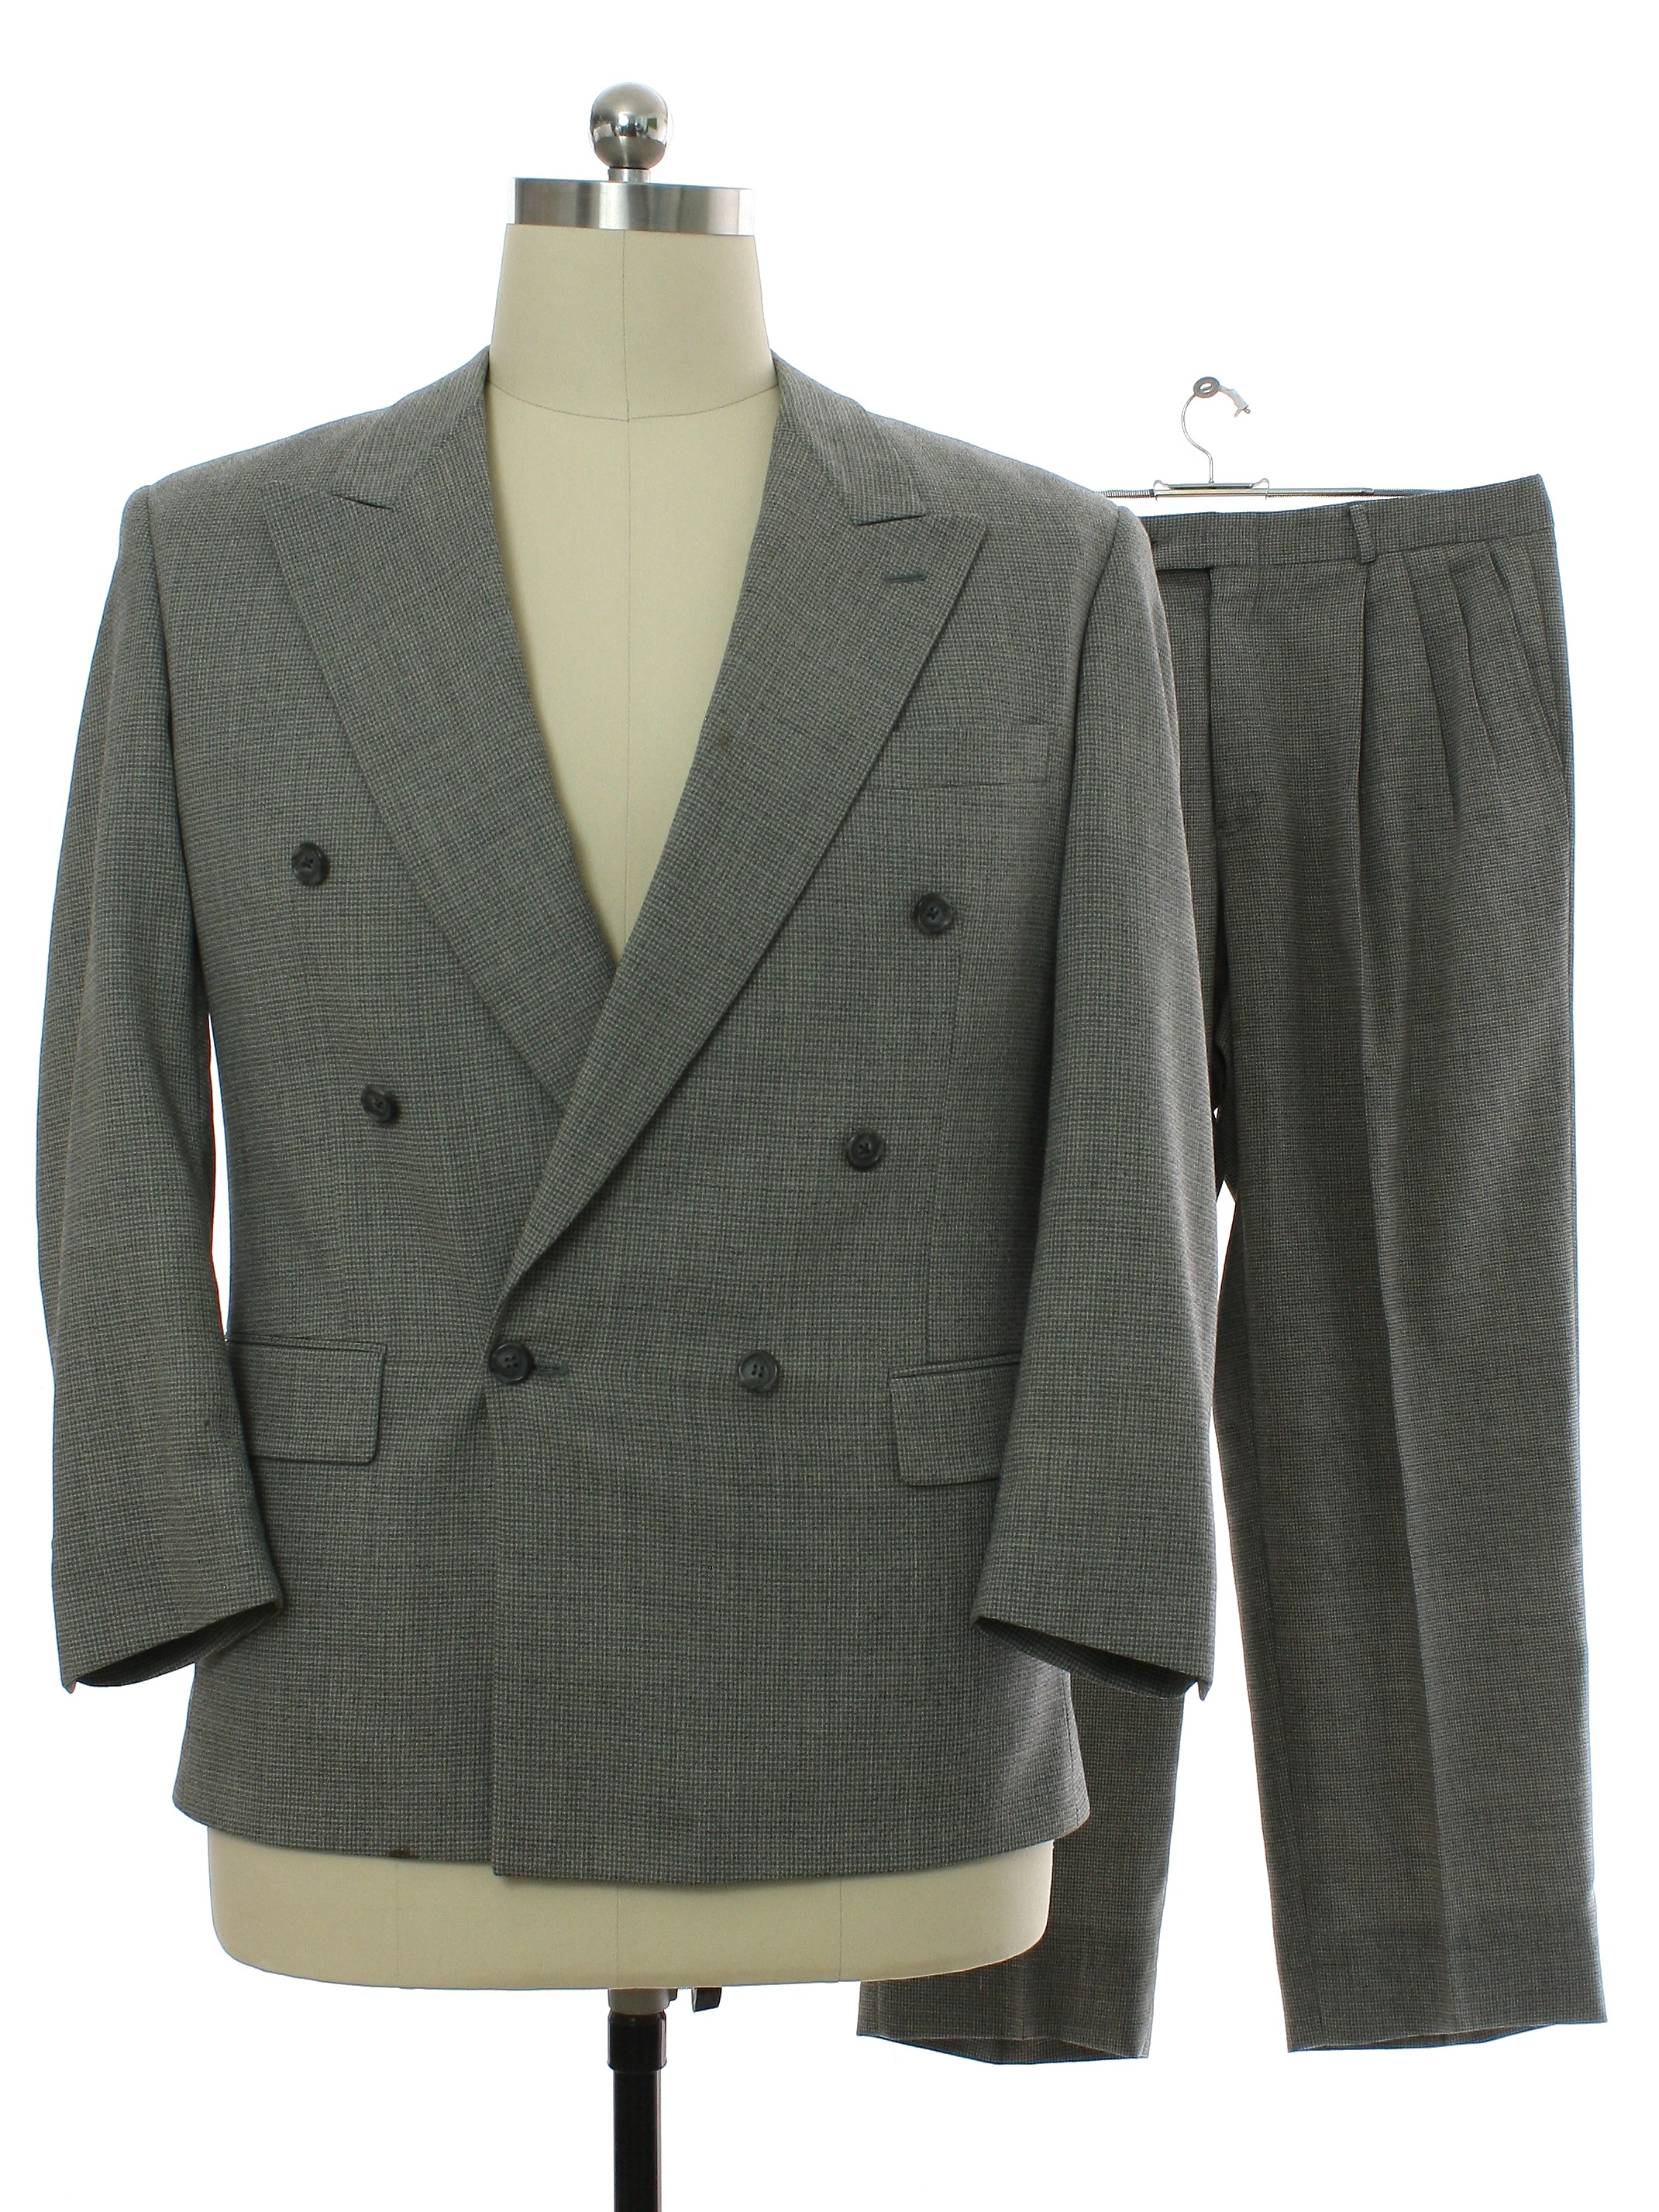 Vintage Givenchy Nineties Suit: 90s -Givenchy- Mens shades of gray tiny ...